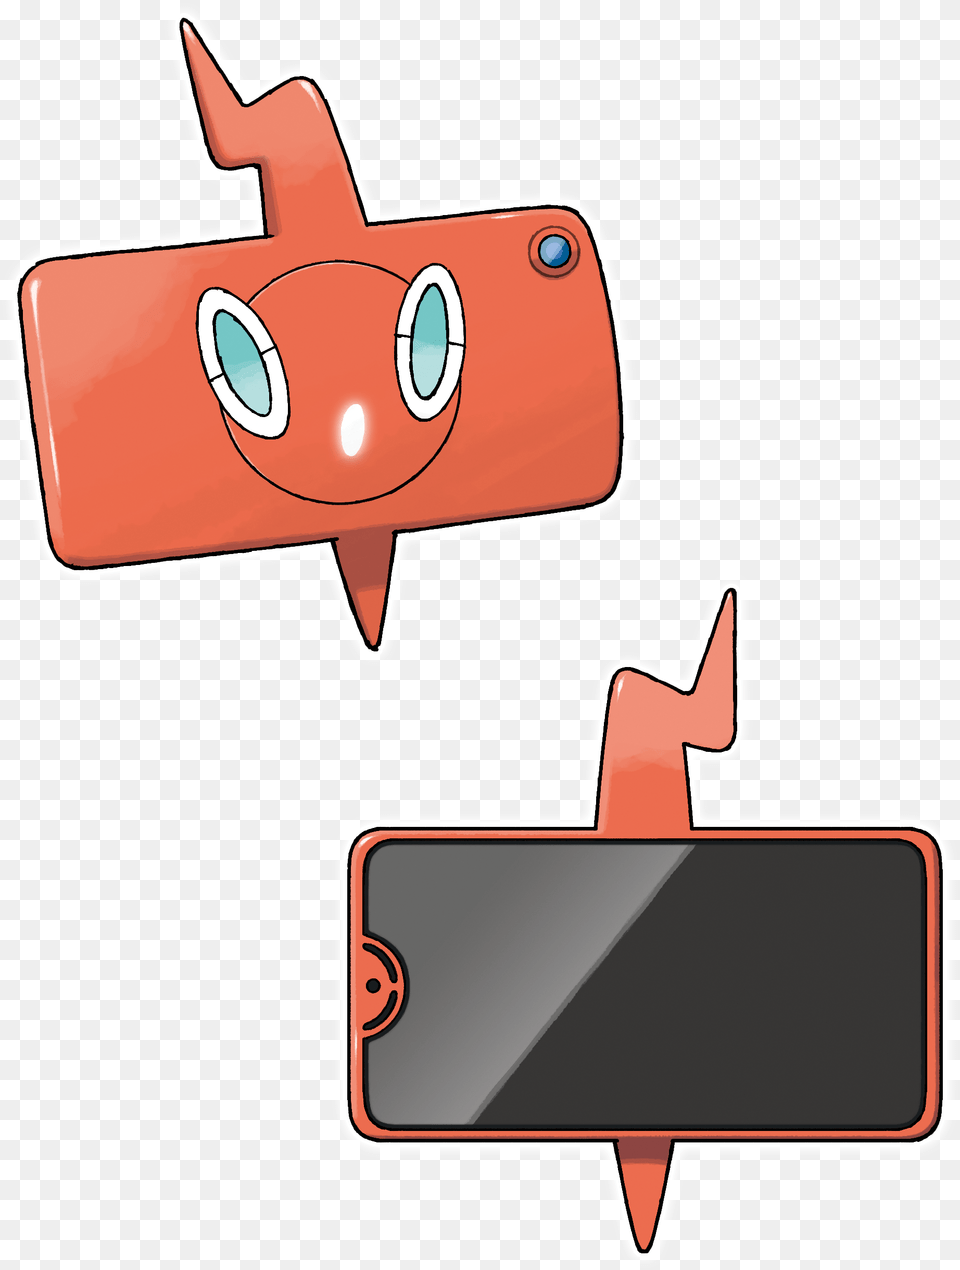 Pokemon Sword And Shield Pokmon Sword And Shield Clipart Rotom Pokemon Sword And Shield, Sticker Free Png Download